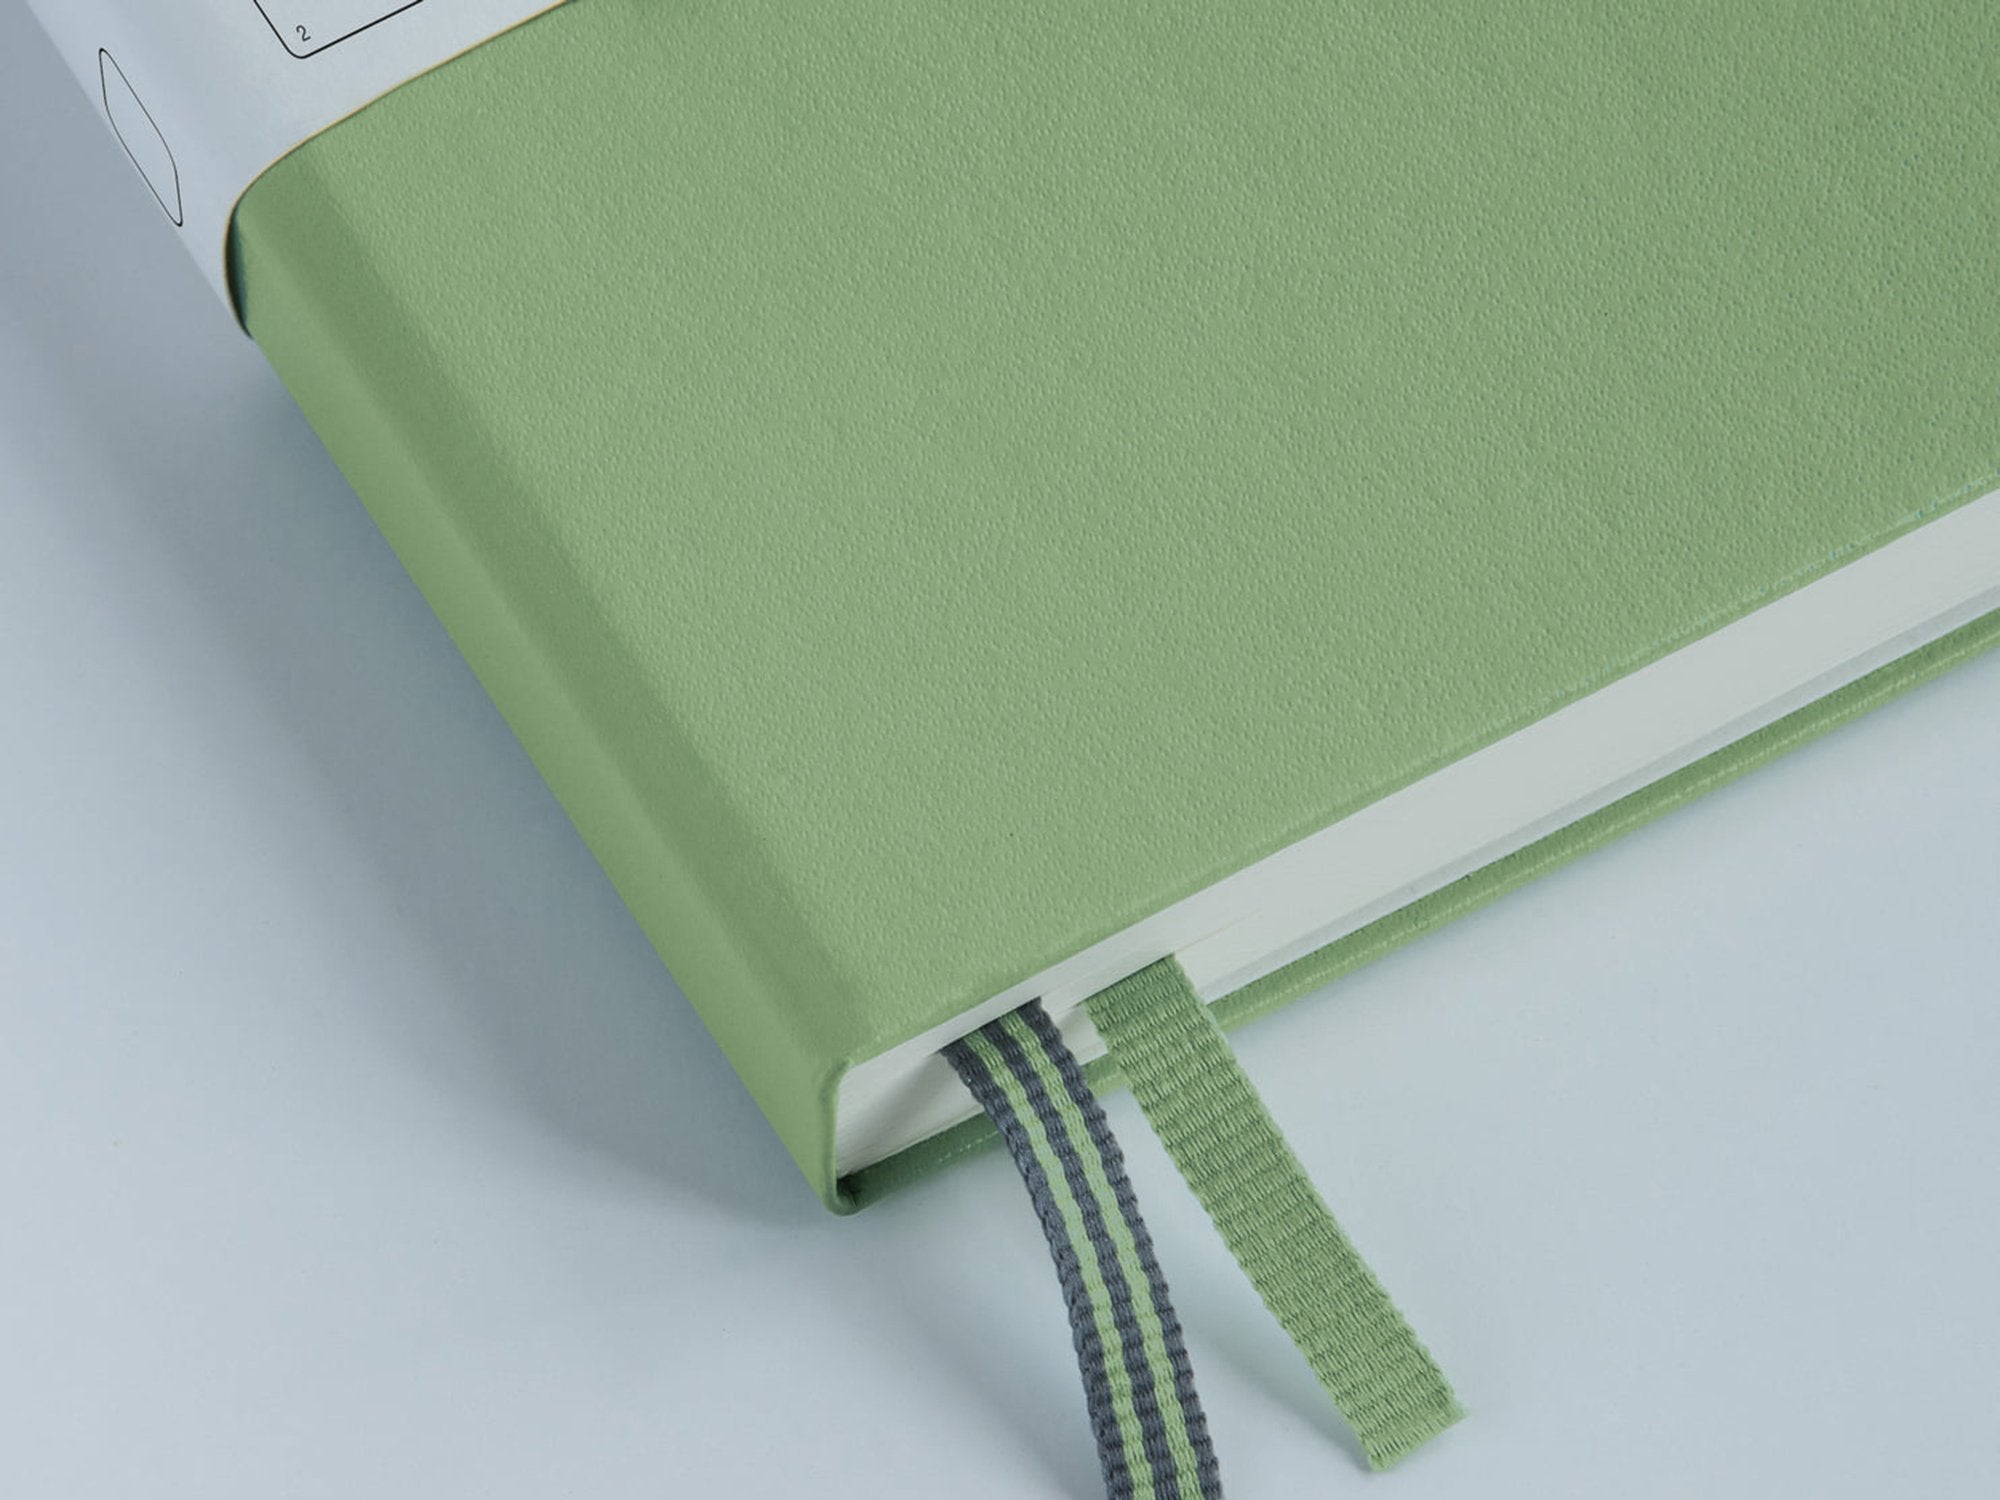 Leuchtturm 1917 Notebook A4 plus Sage Green Dotted Hard Cover